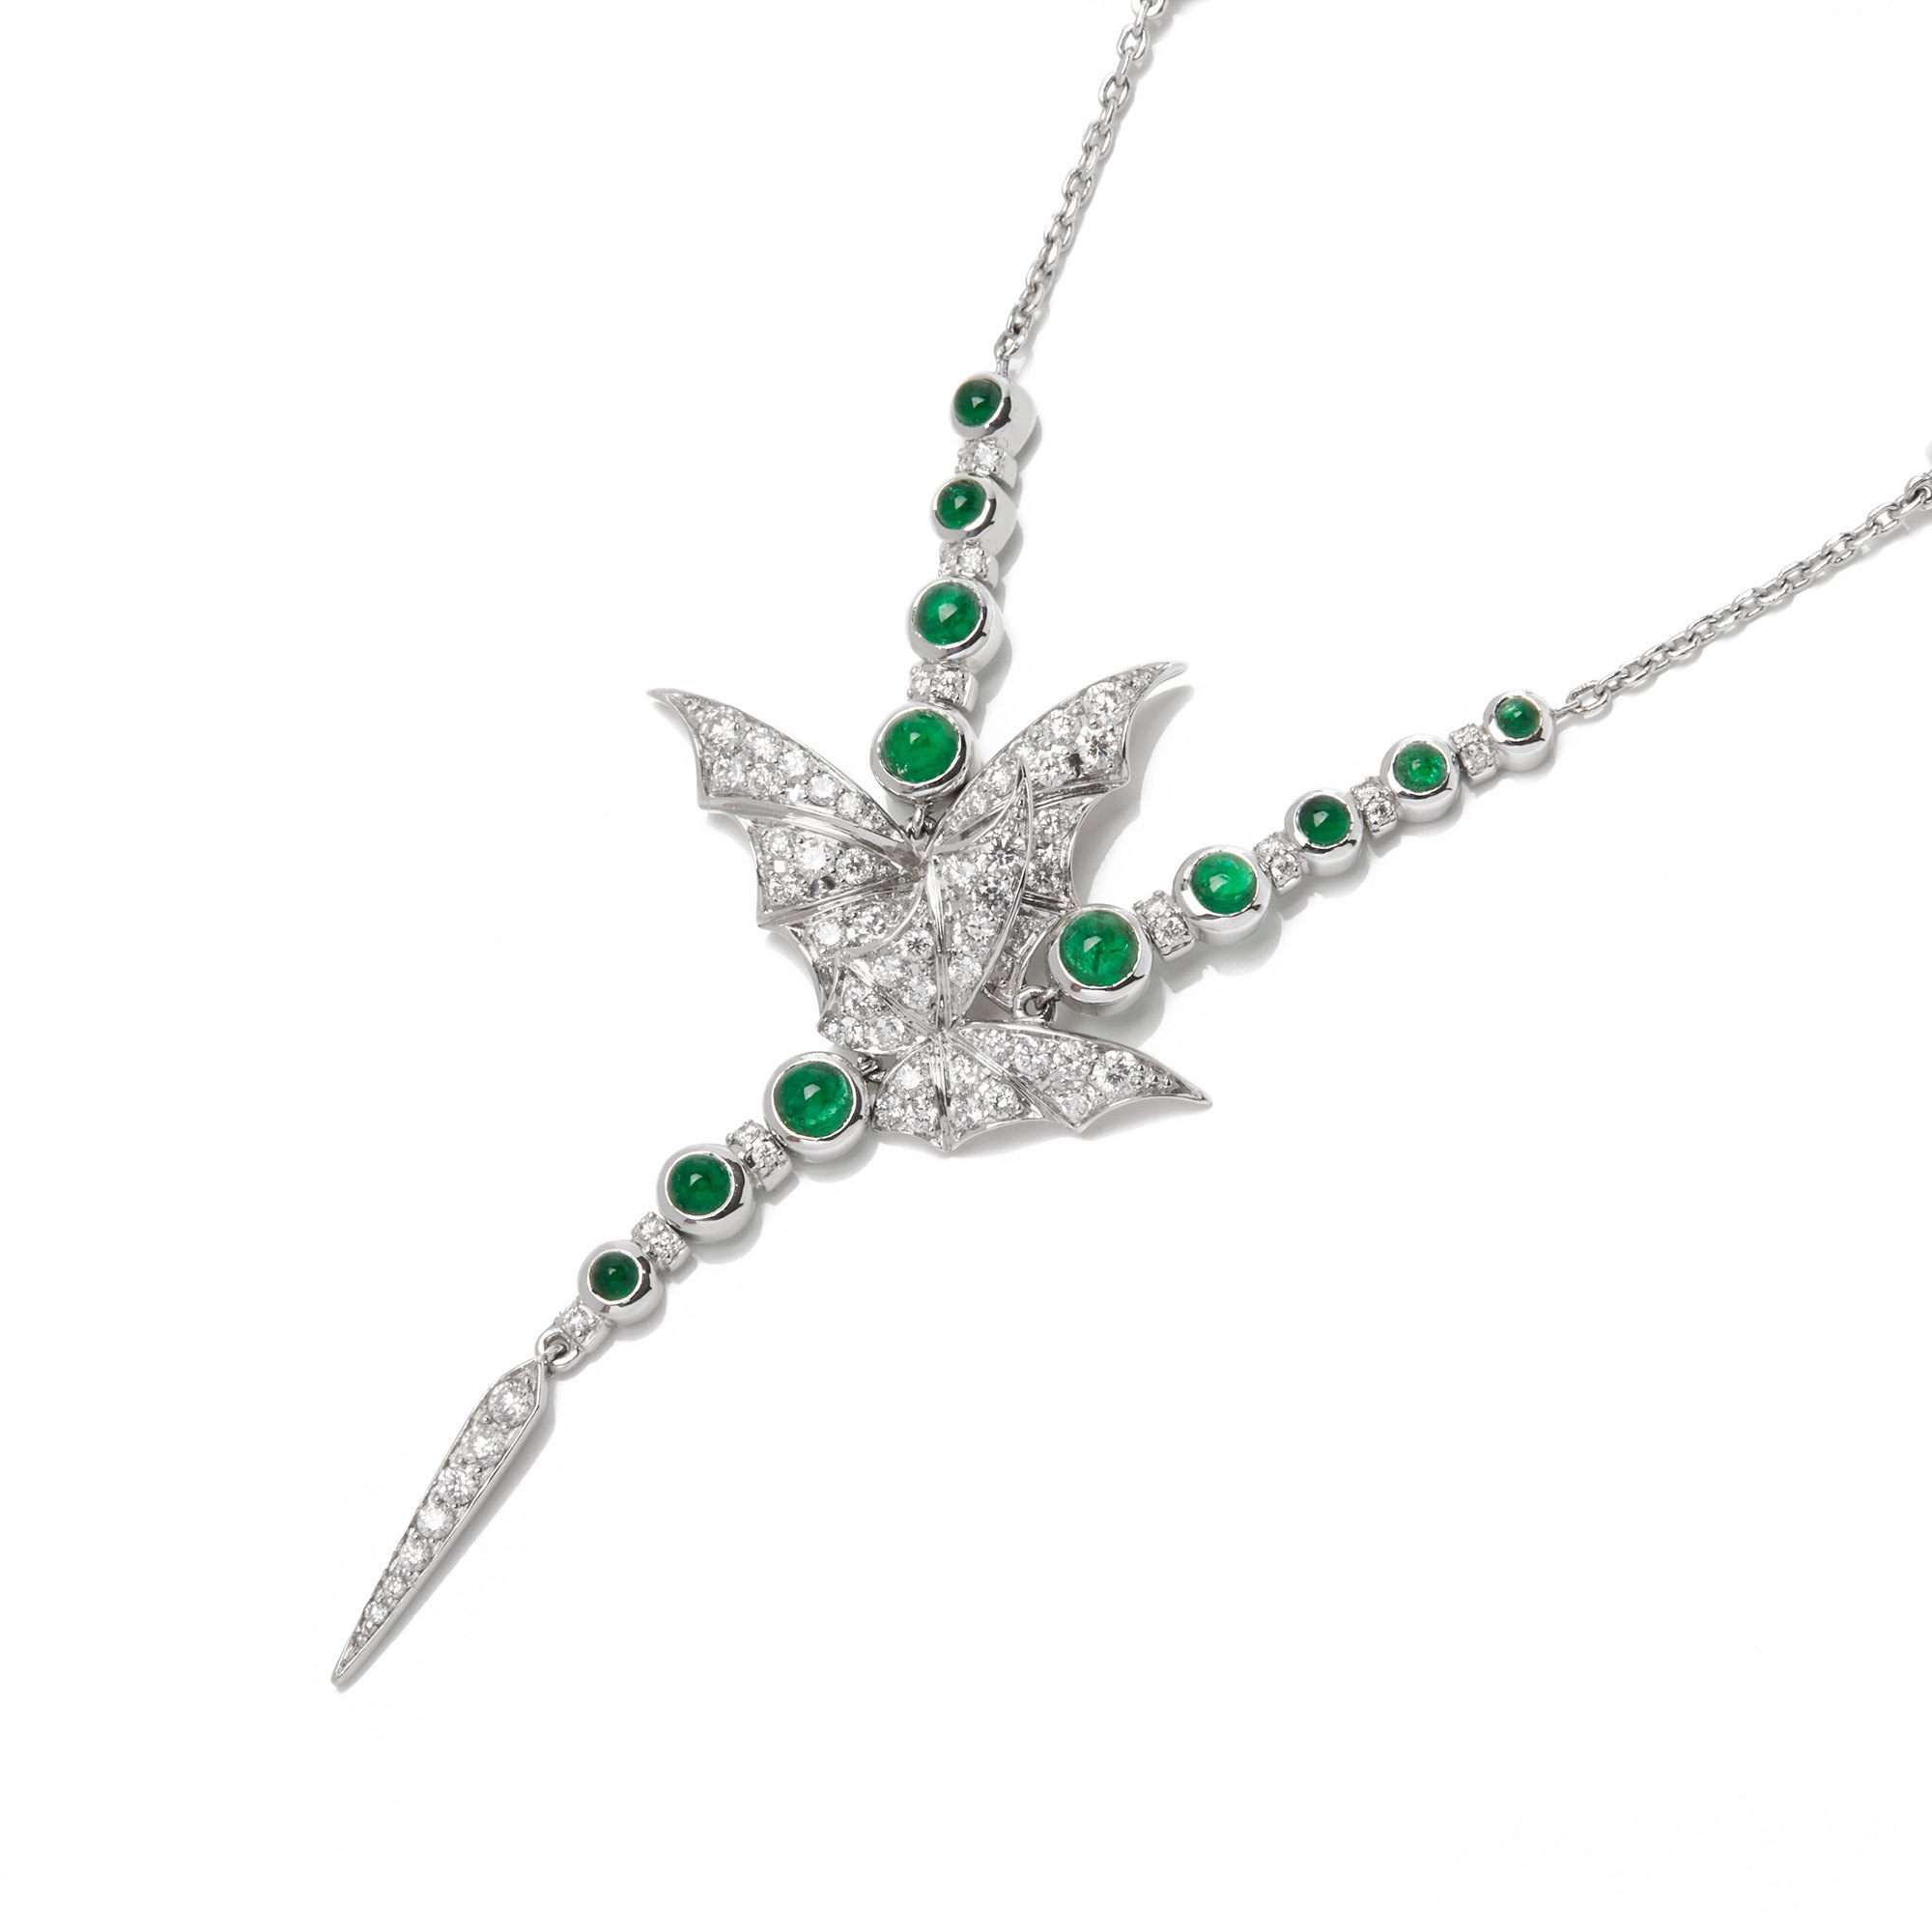 Stephen Webster 18ct Gold Fly by Night Diamond and Emerald necklace